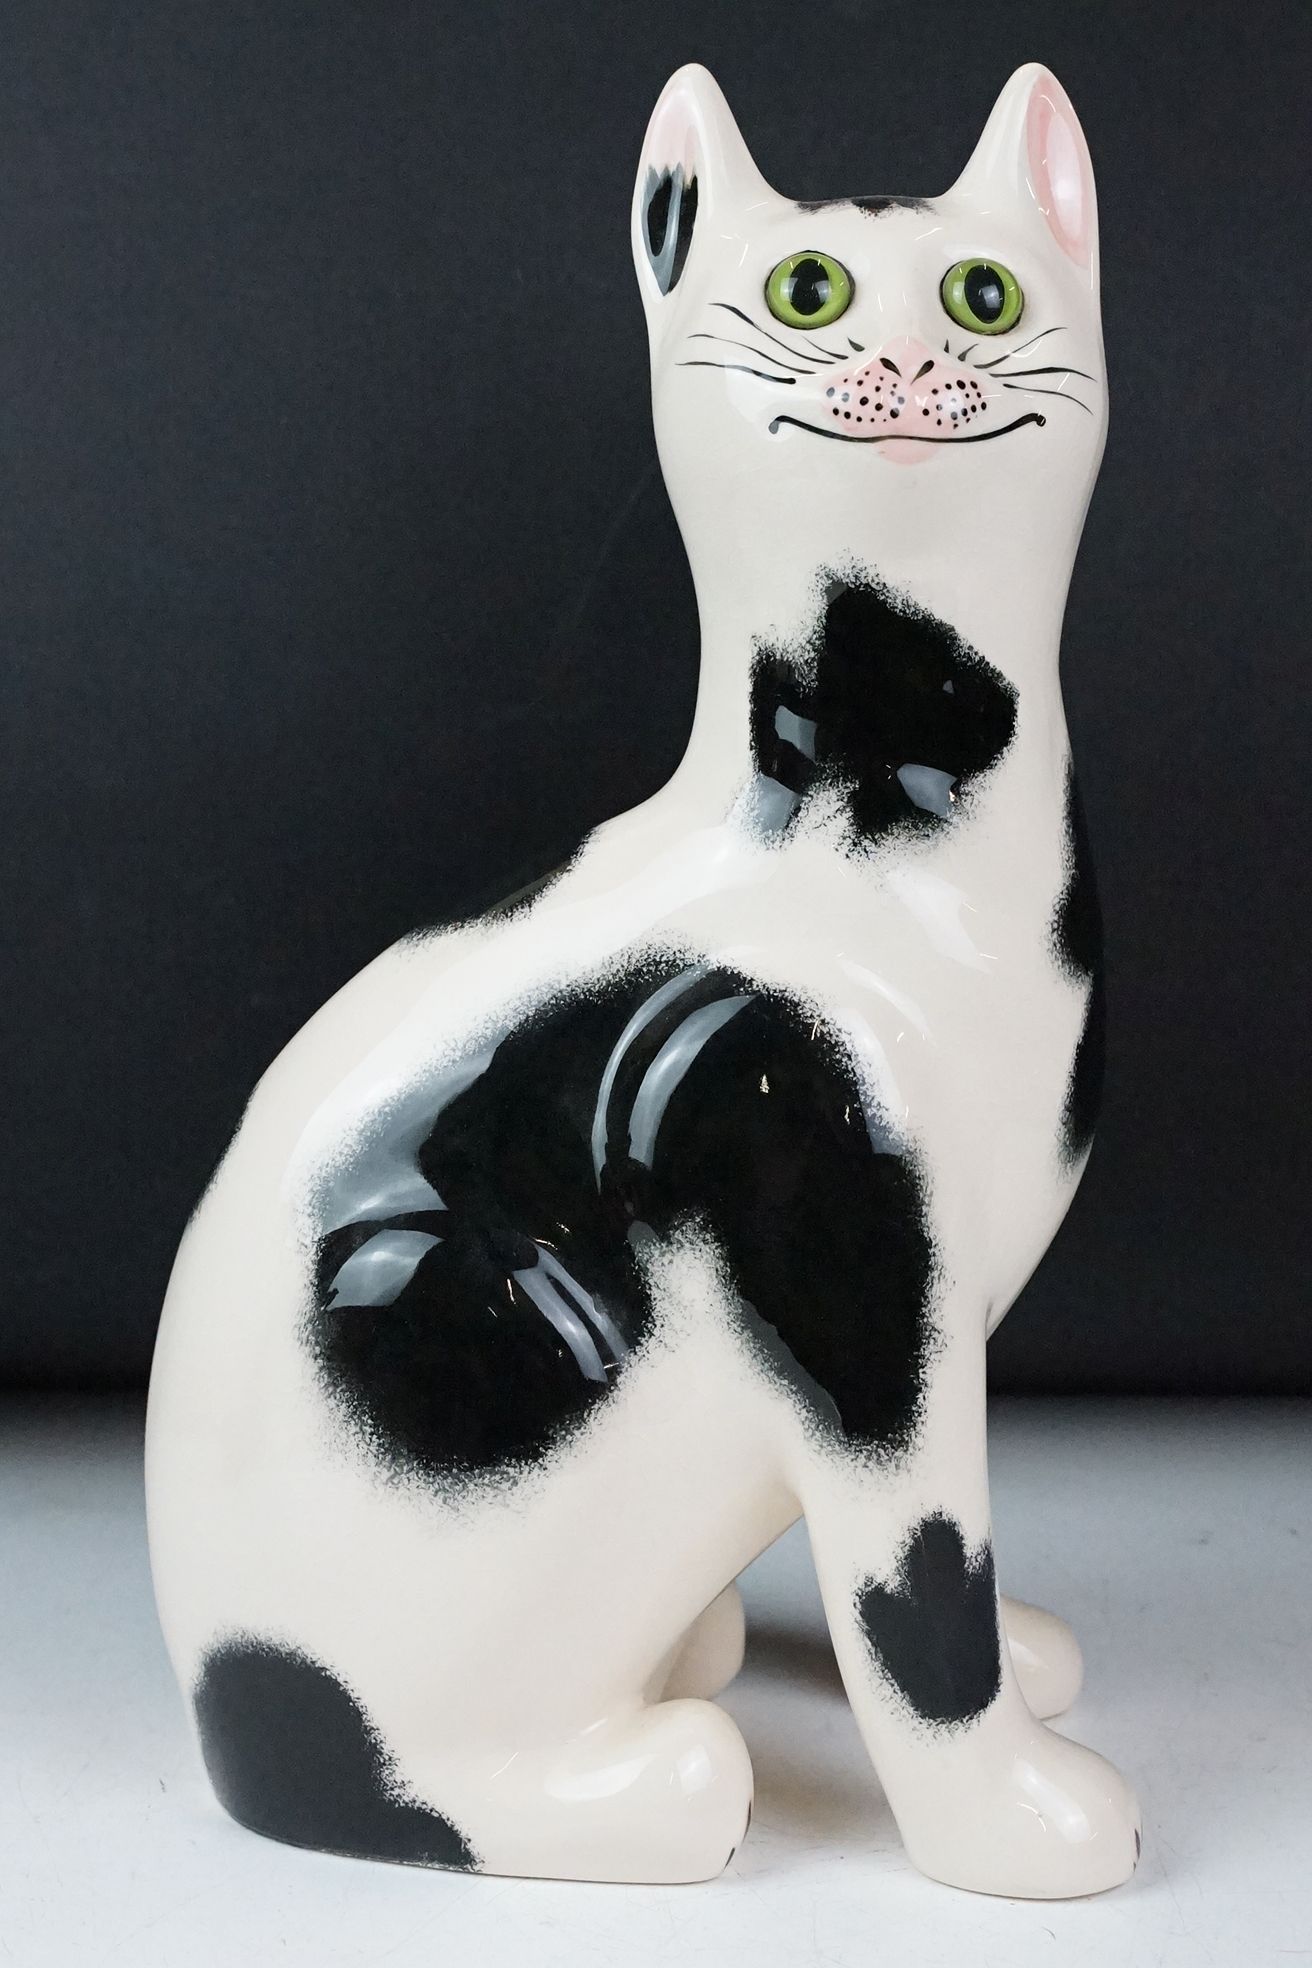 Griselda Hill Pottery Wemyss black and white cat, signed G. Hill Pottery to base and Wemyss, 34cm - Image 2 of 10